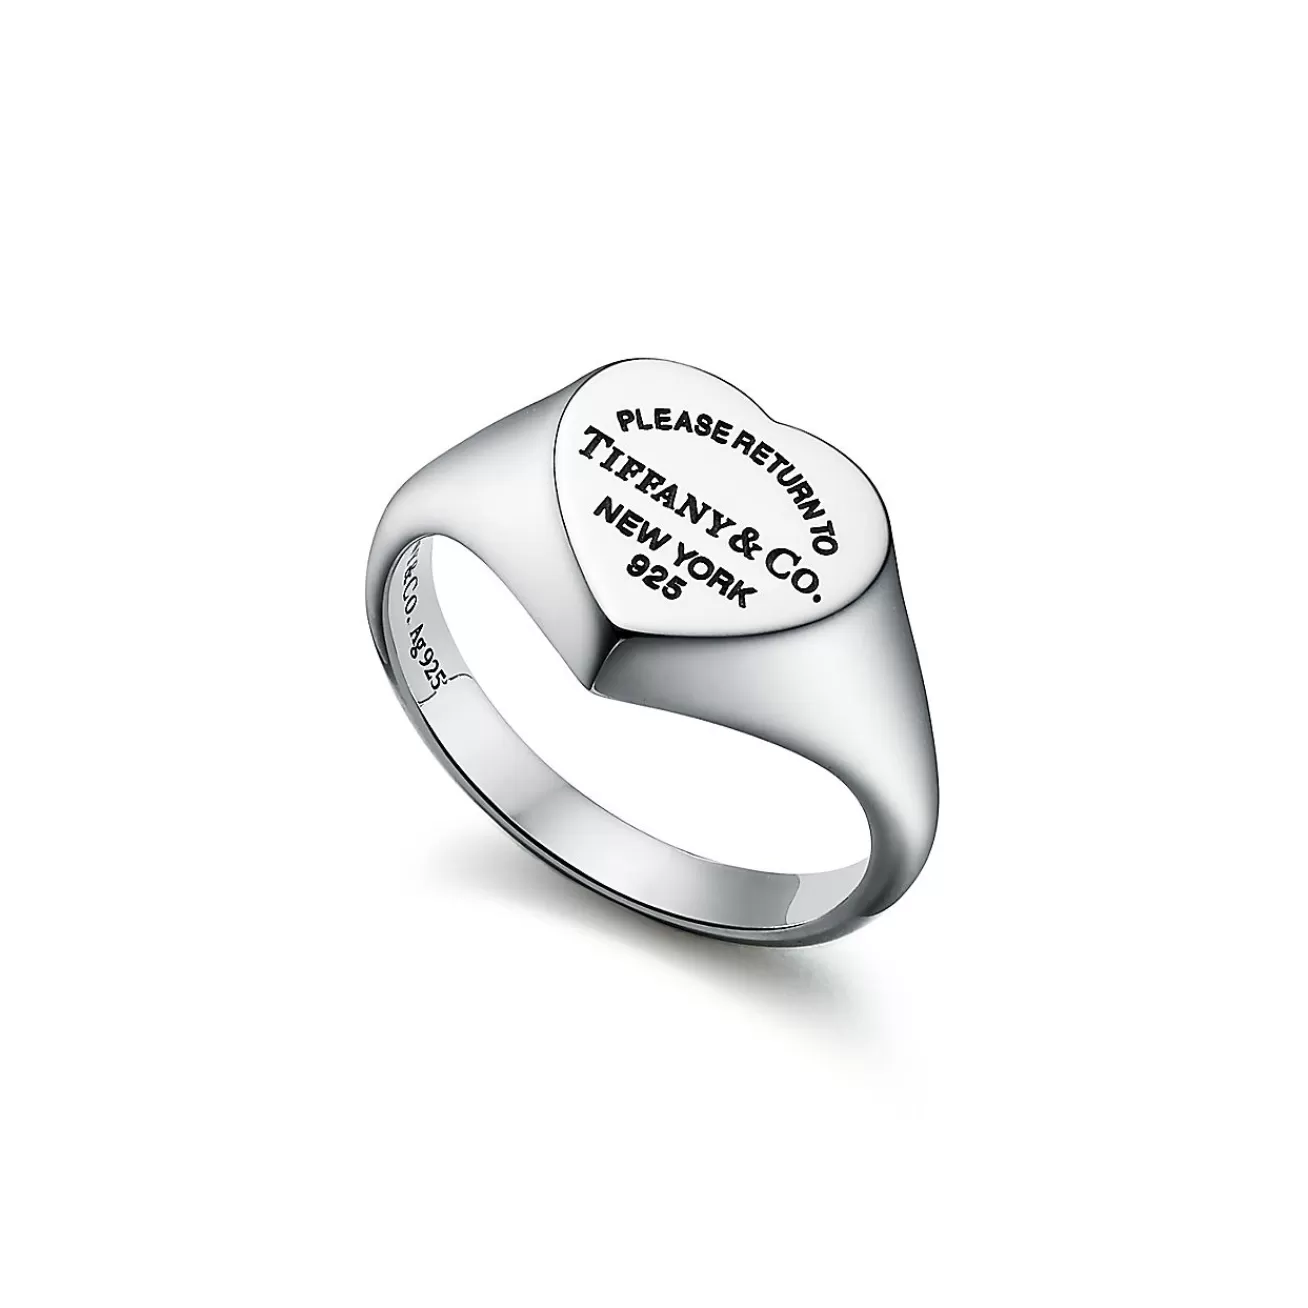 Tiffany & Co. Return to Tiffany® Heart Signet Ring in Silver, Small | ^ Rings | Most Popular Jewelry